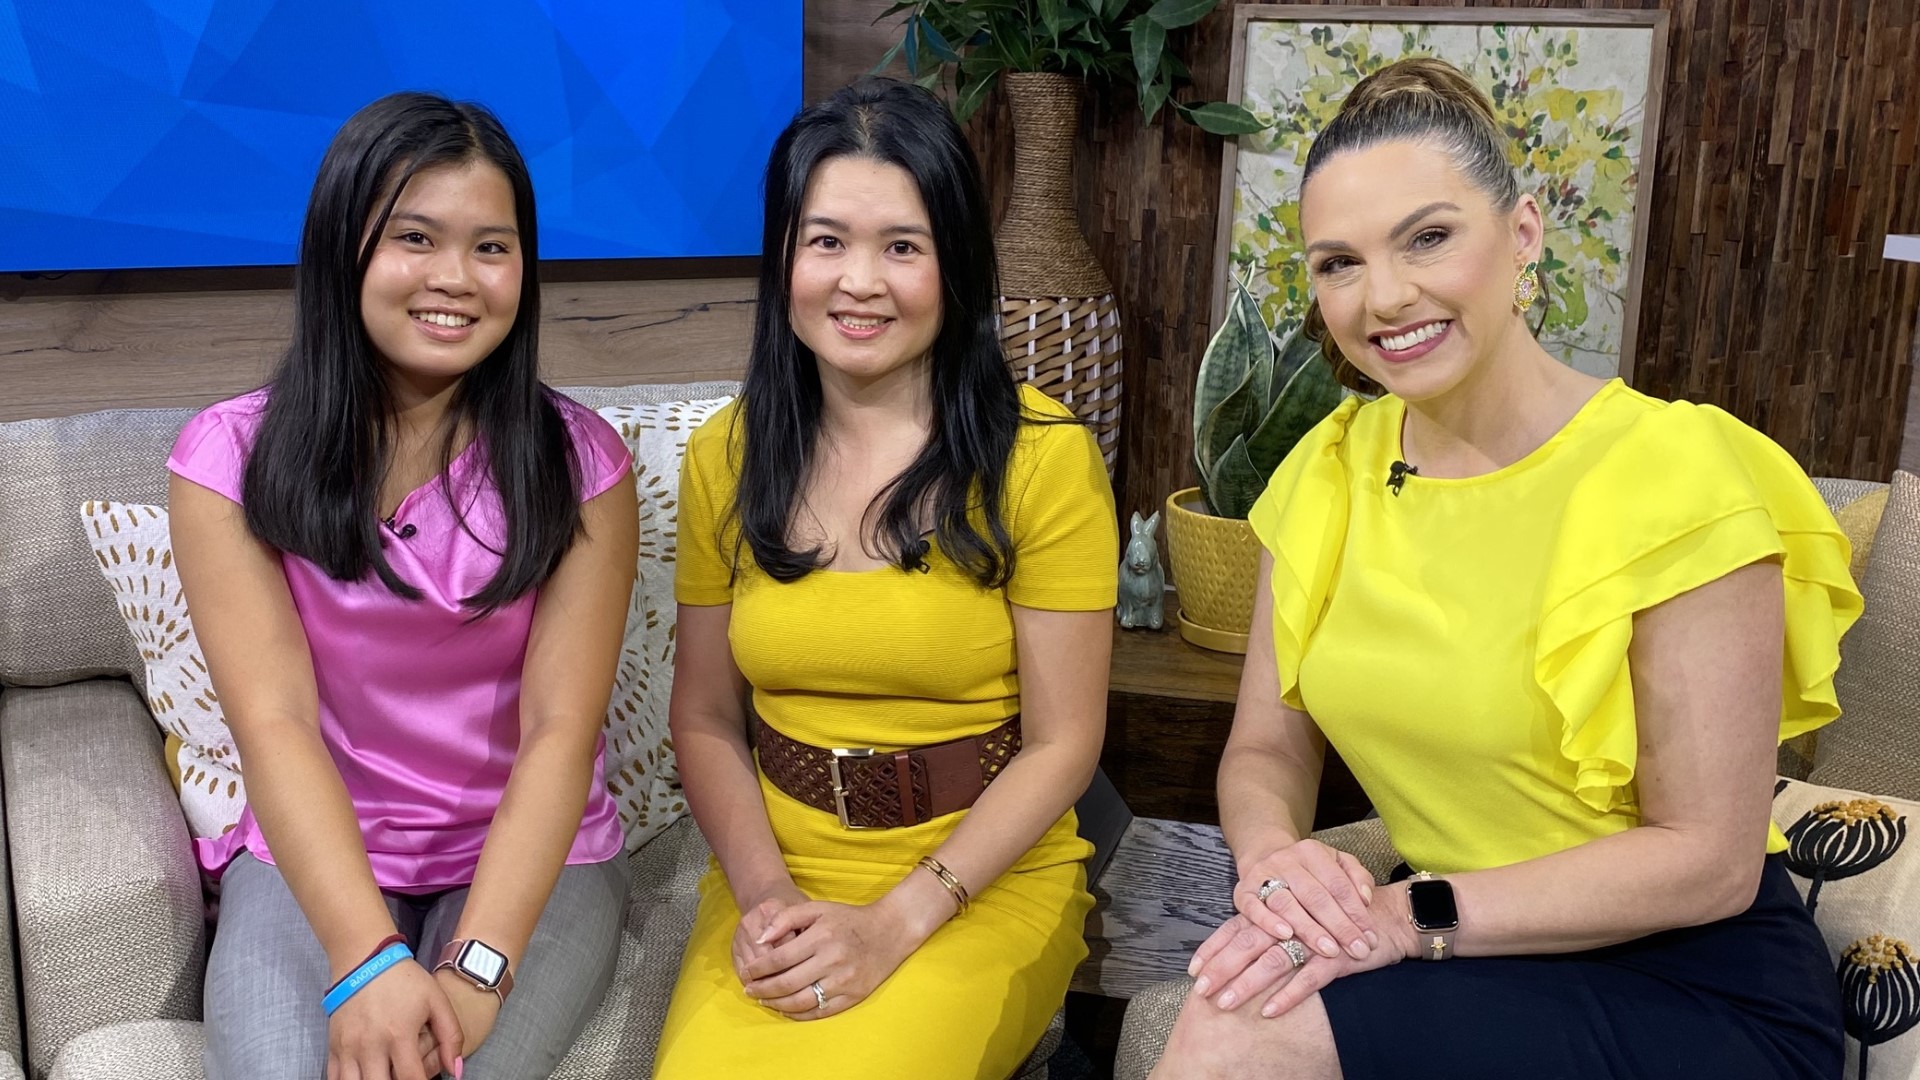 Student leader Hayley Dau and her mother Huyen talk about One Love Foundation’s work to teach teens about dating violence. Sponsored by One Love Foundation.